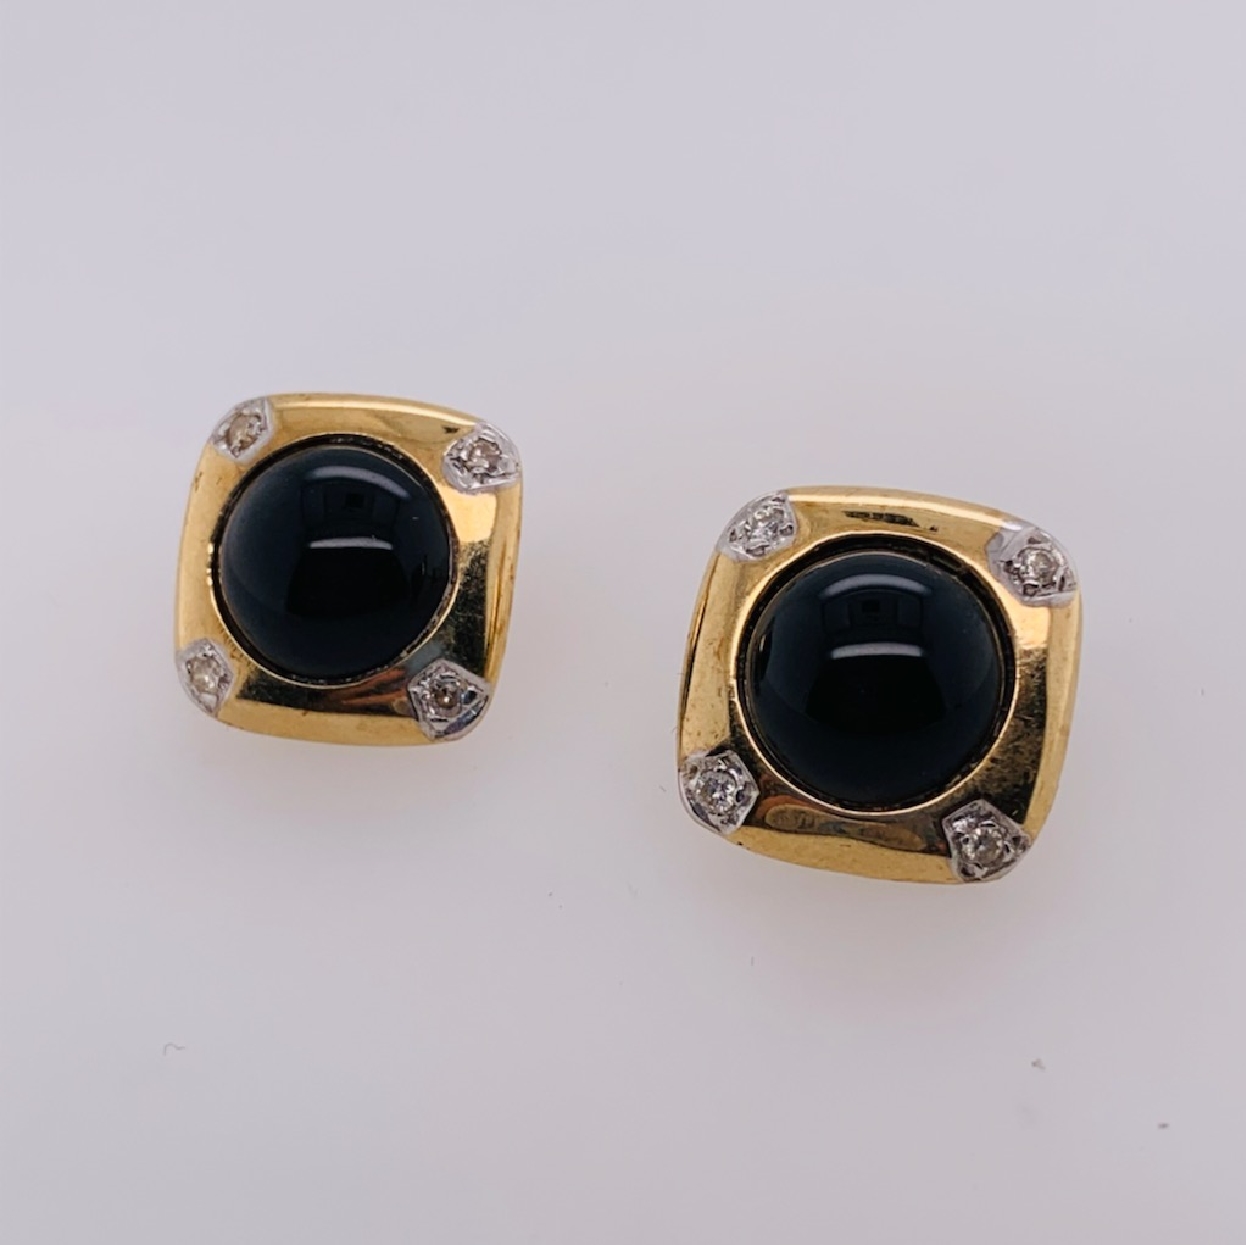 14K Yellow Gold Stud Earrings with Onyx Cabachons and Diamond Accents